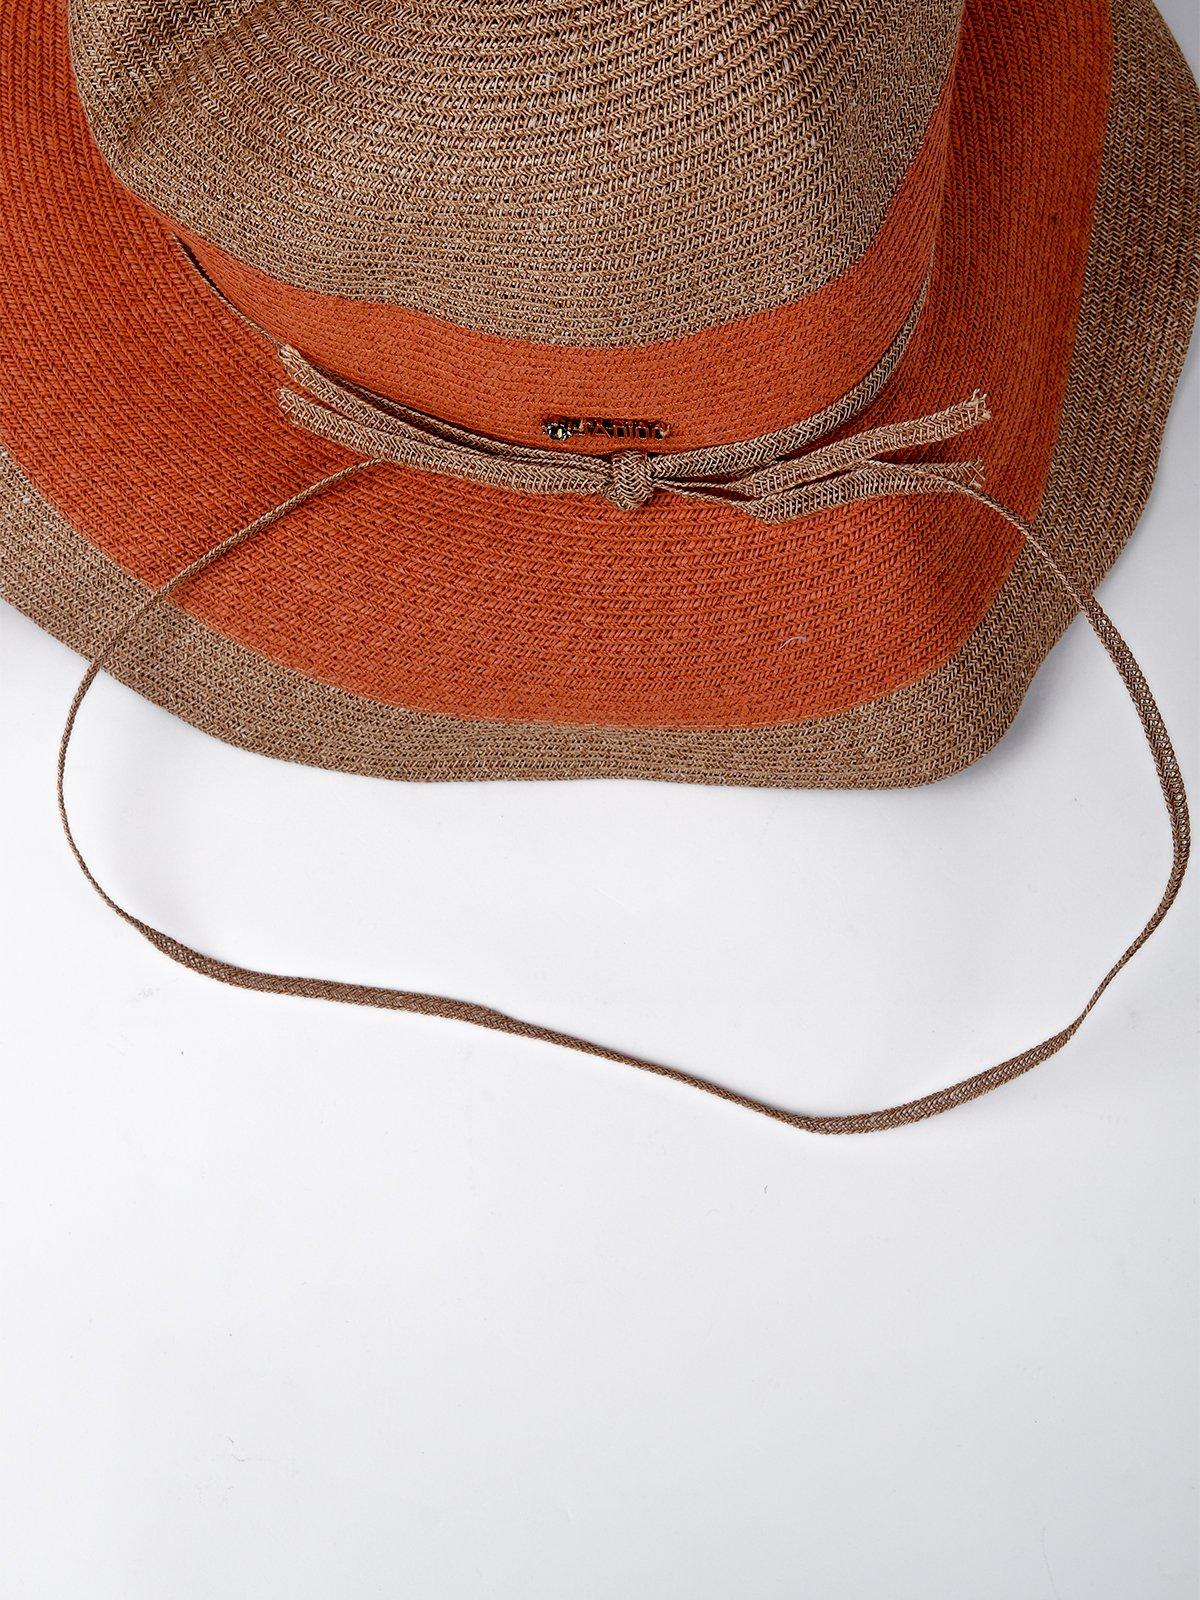 Brown And Tan Coloured Bucket Hat - Odette